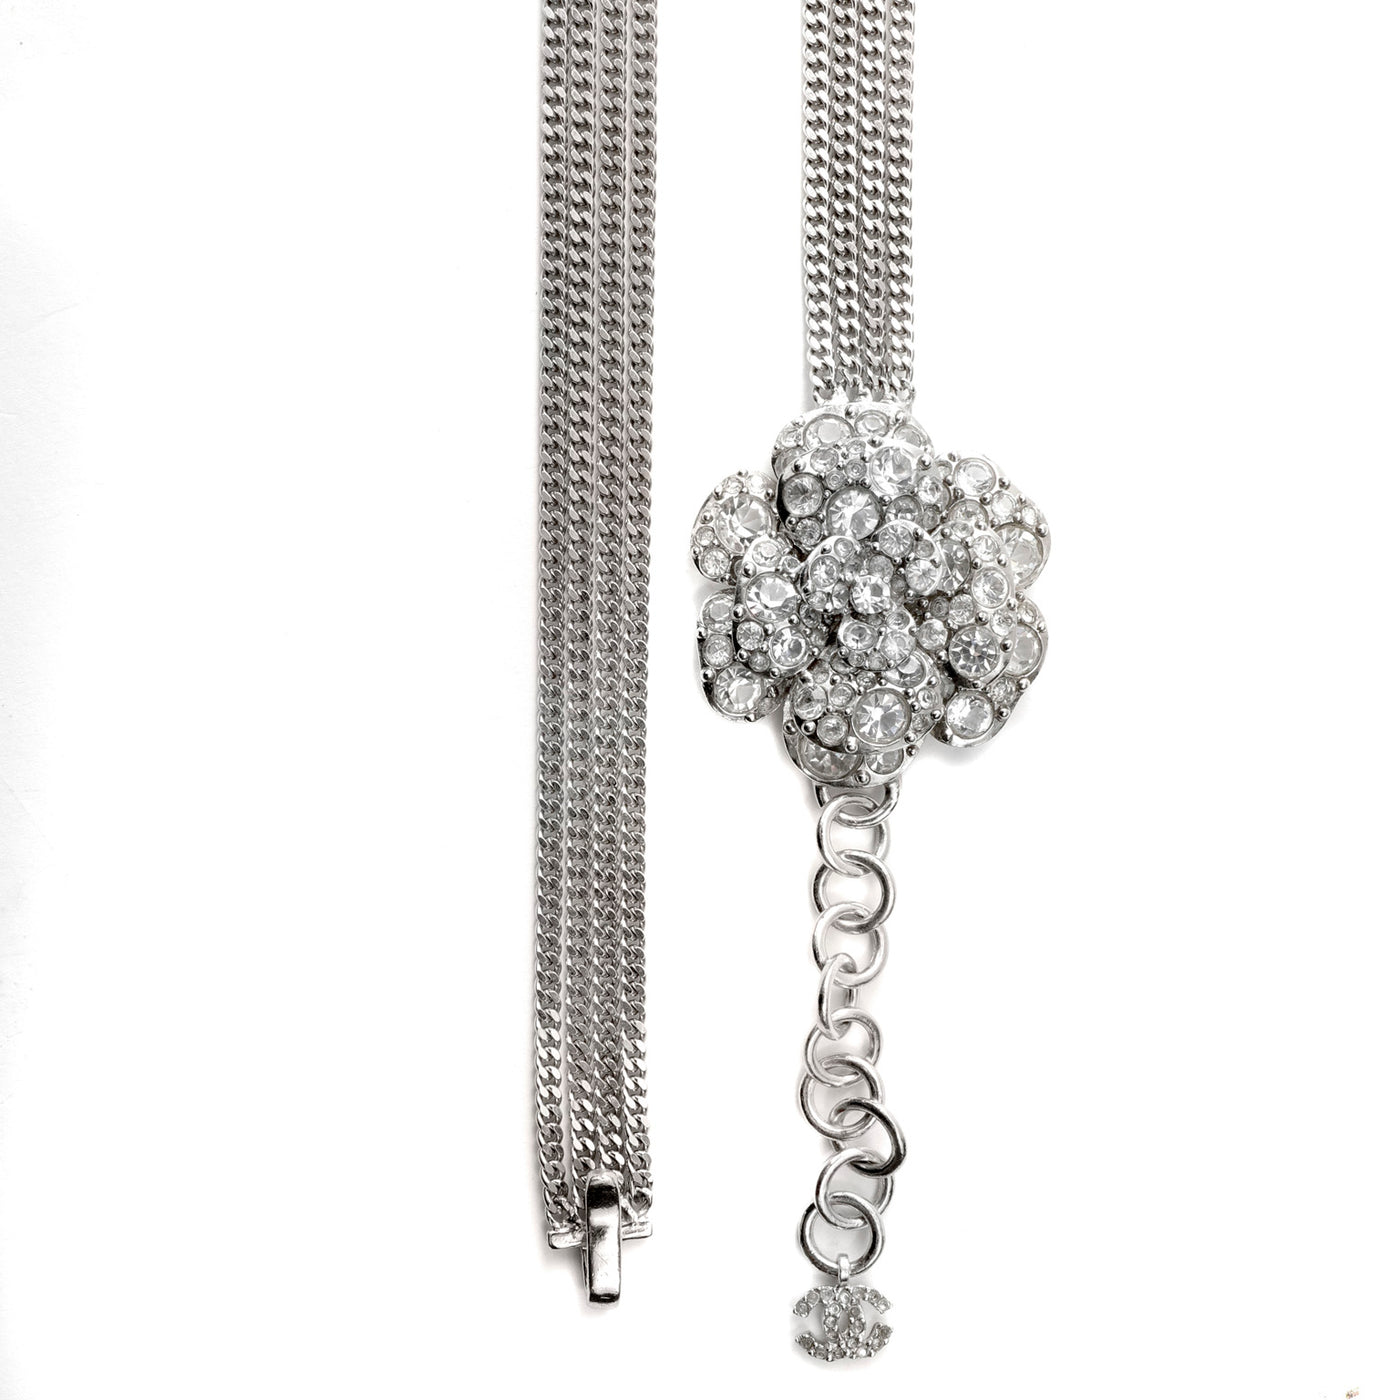 Chanel Silver Multi-Chain Crystal Camellia Necklace